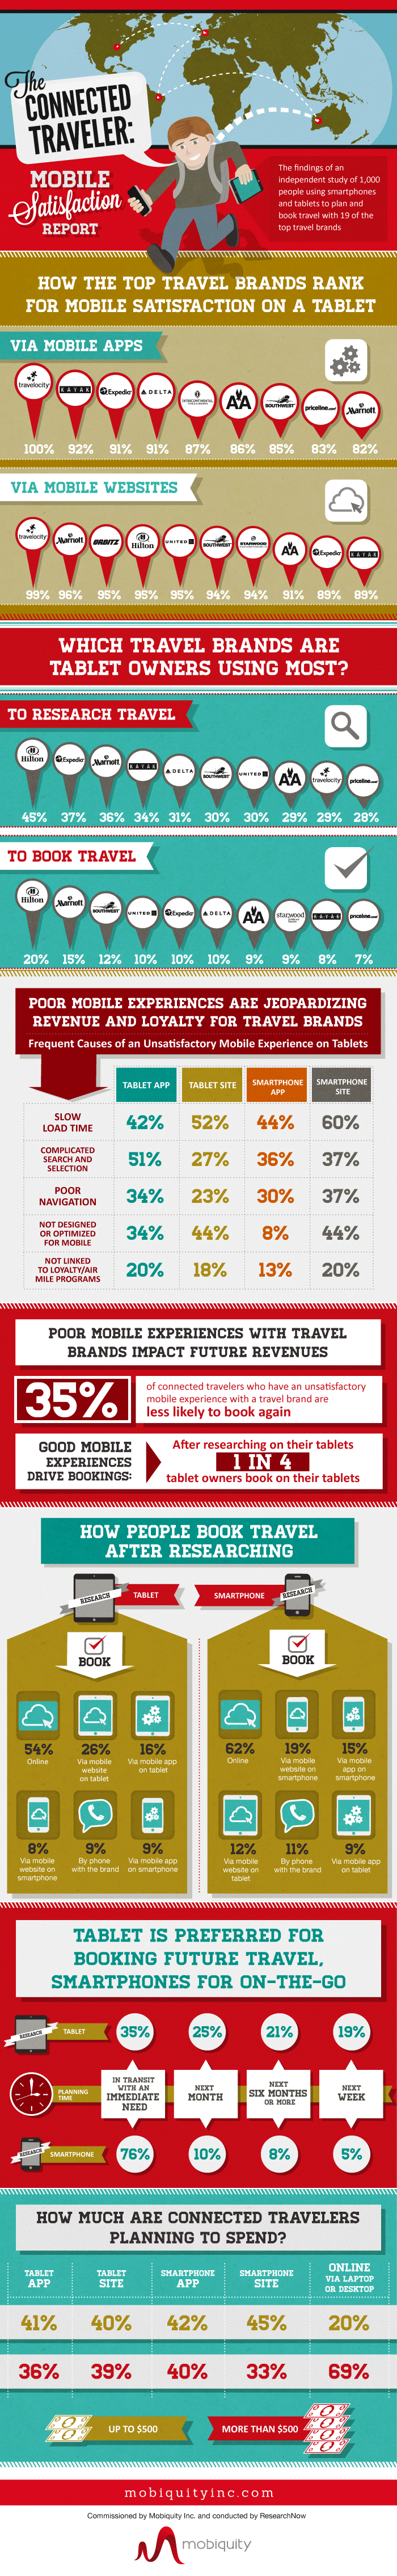 The Connected Traveler: Mobile Satisfaction Report